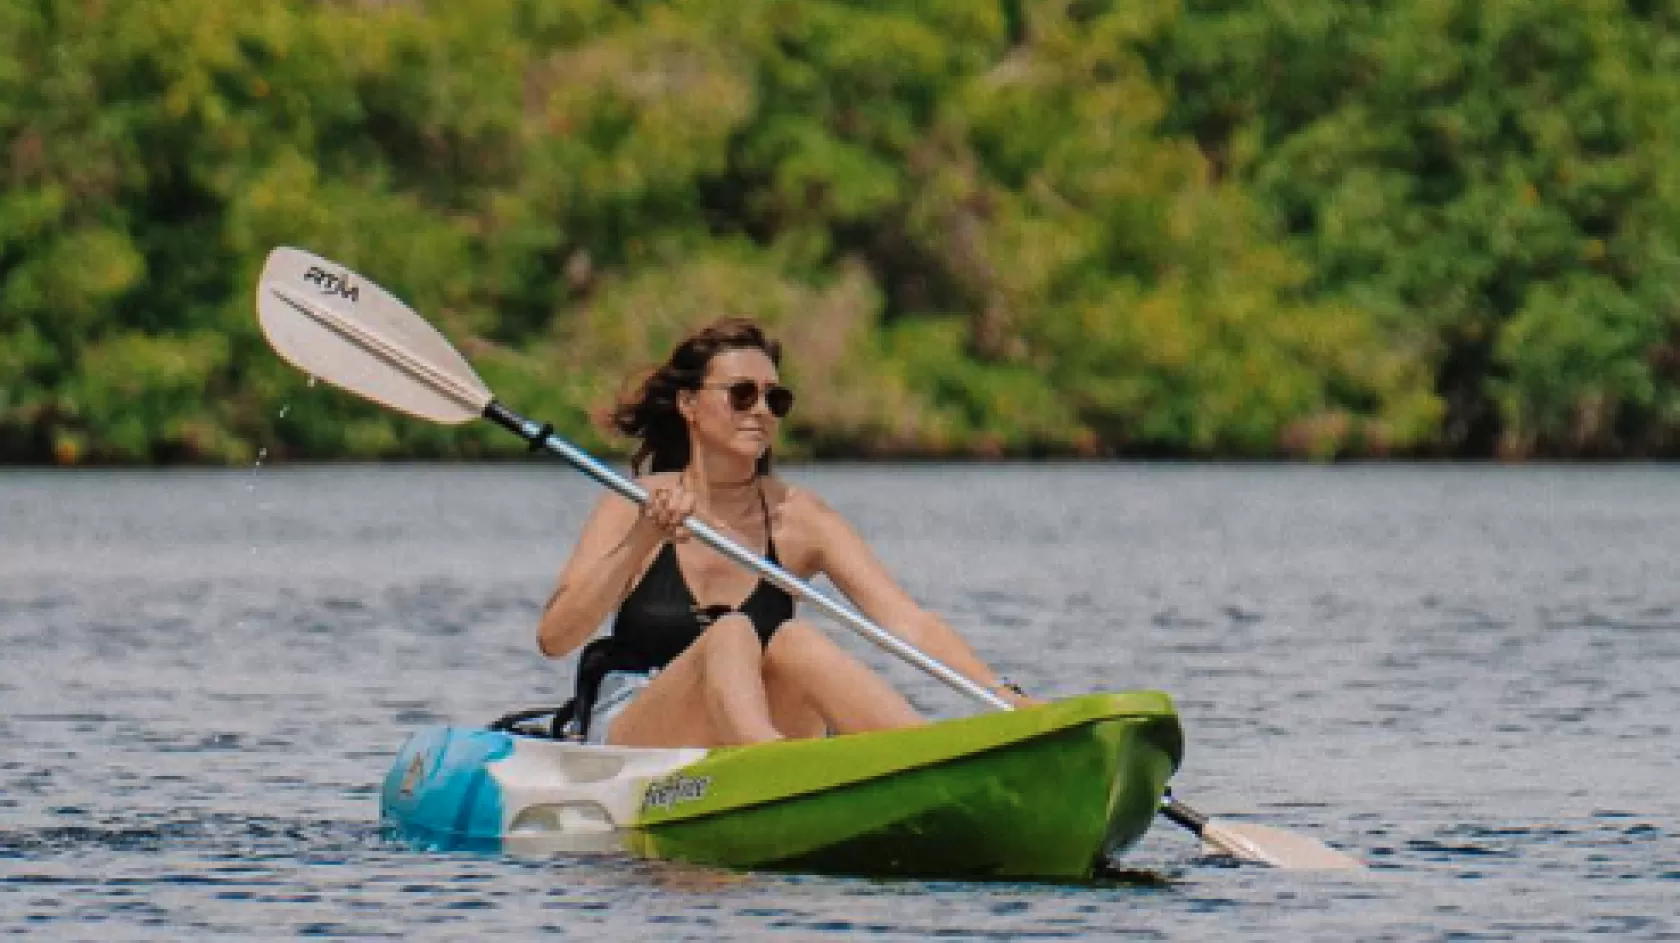 A woman paddles through calm waters on a kayak